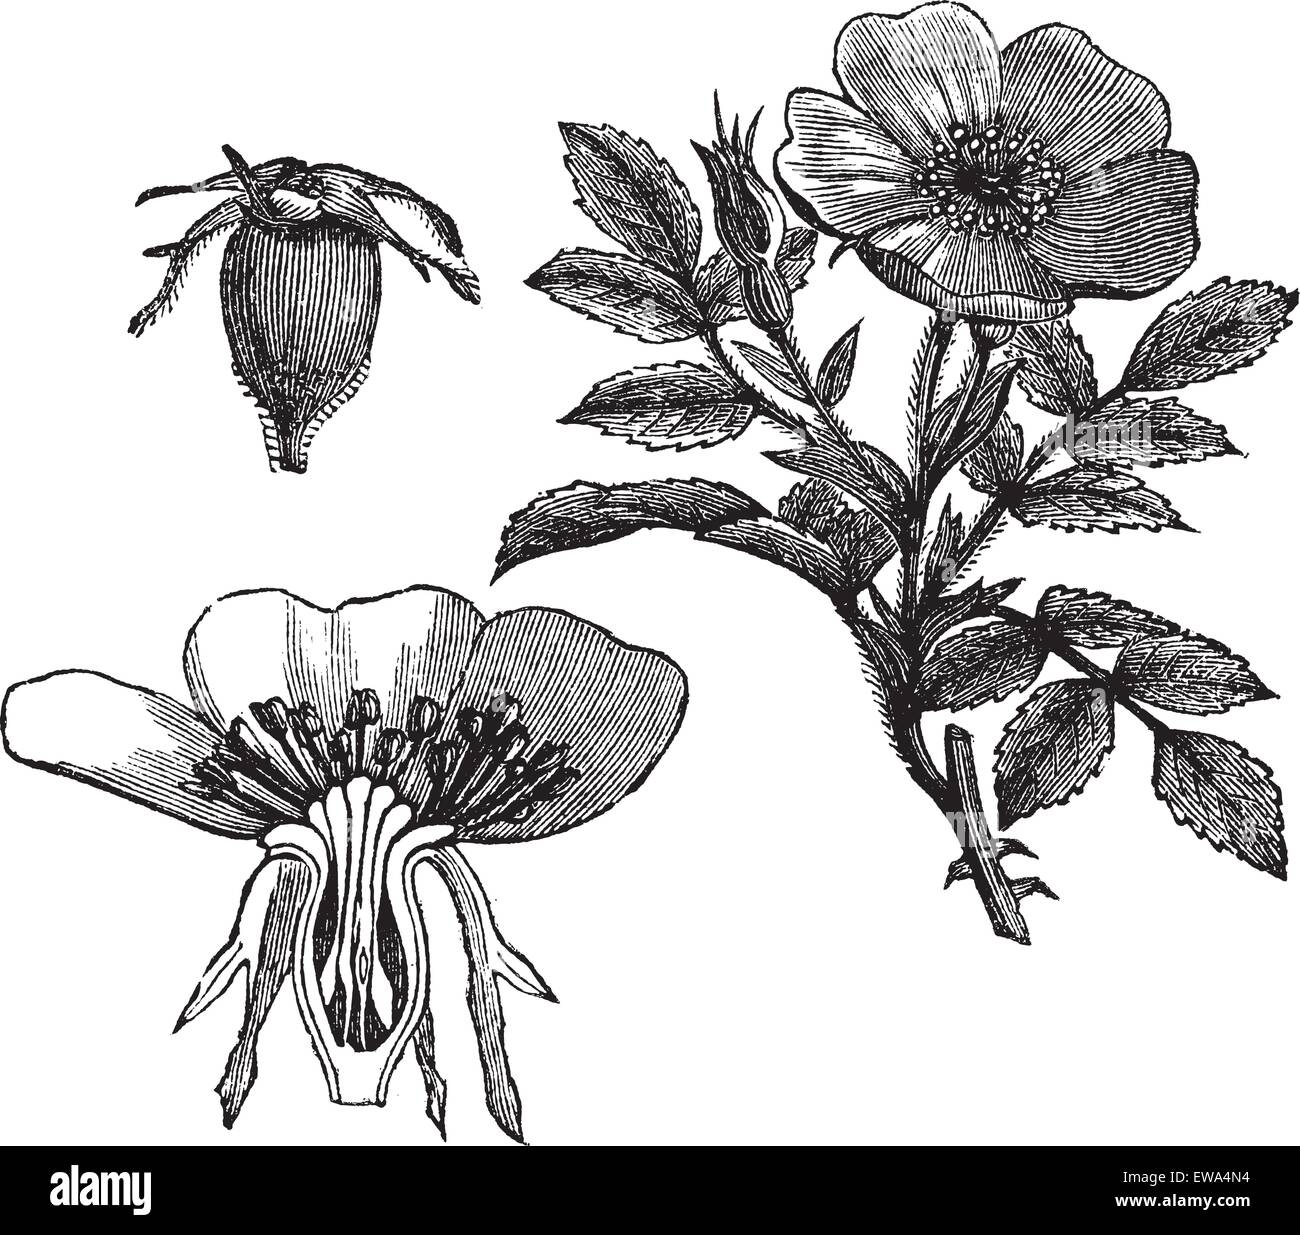 Carolina rose or Rosa carolina or Pasture rose or Low rose, vintage engraving. Old engraved illustration of Carolina rose with flower and fruit  isolated on a white background. Stock Vector